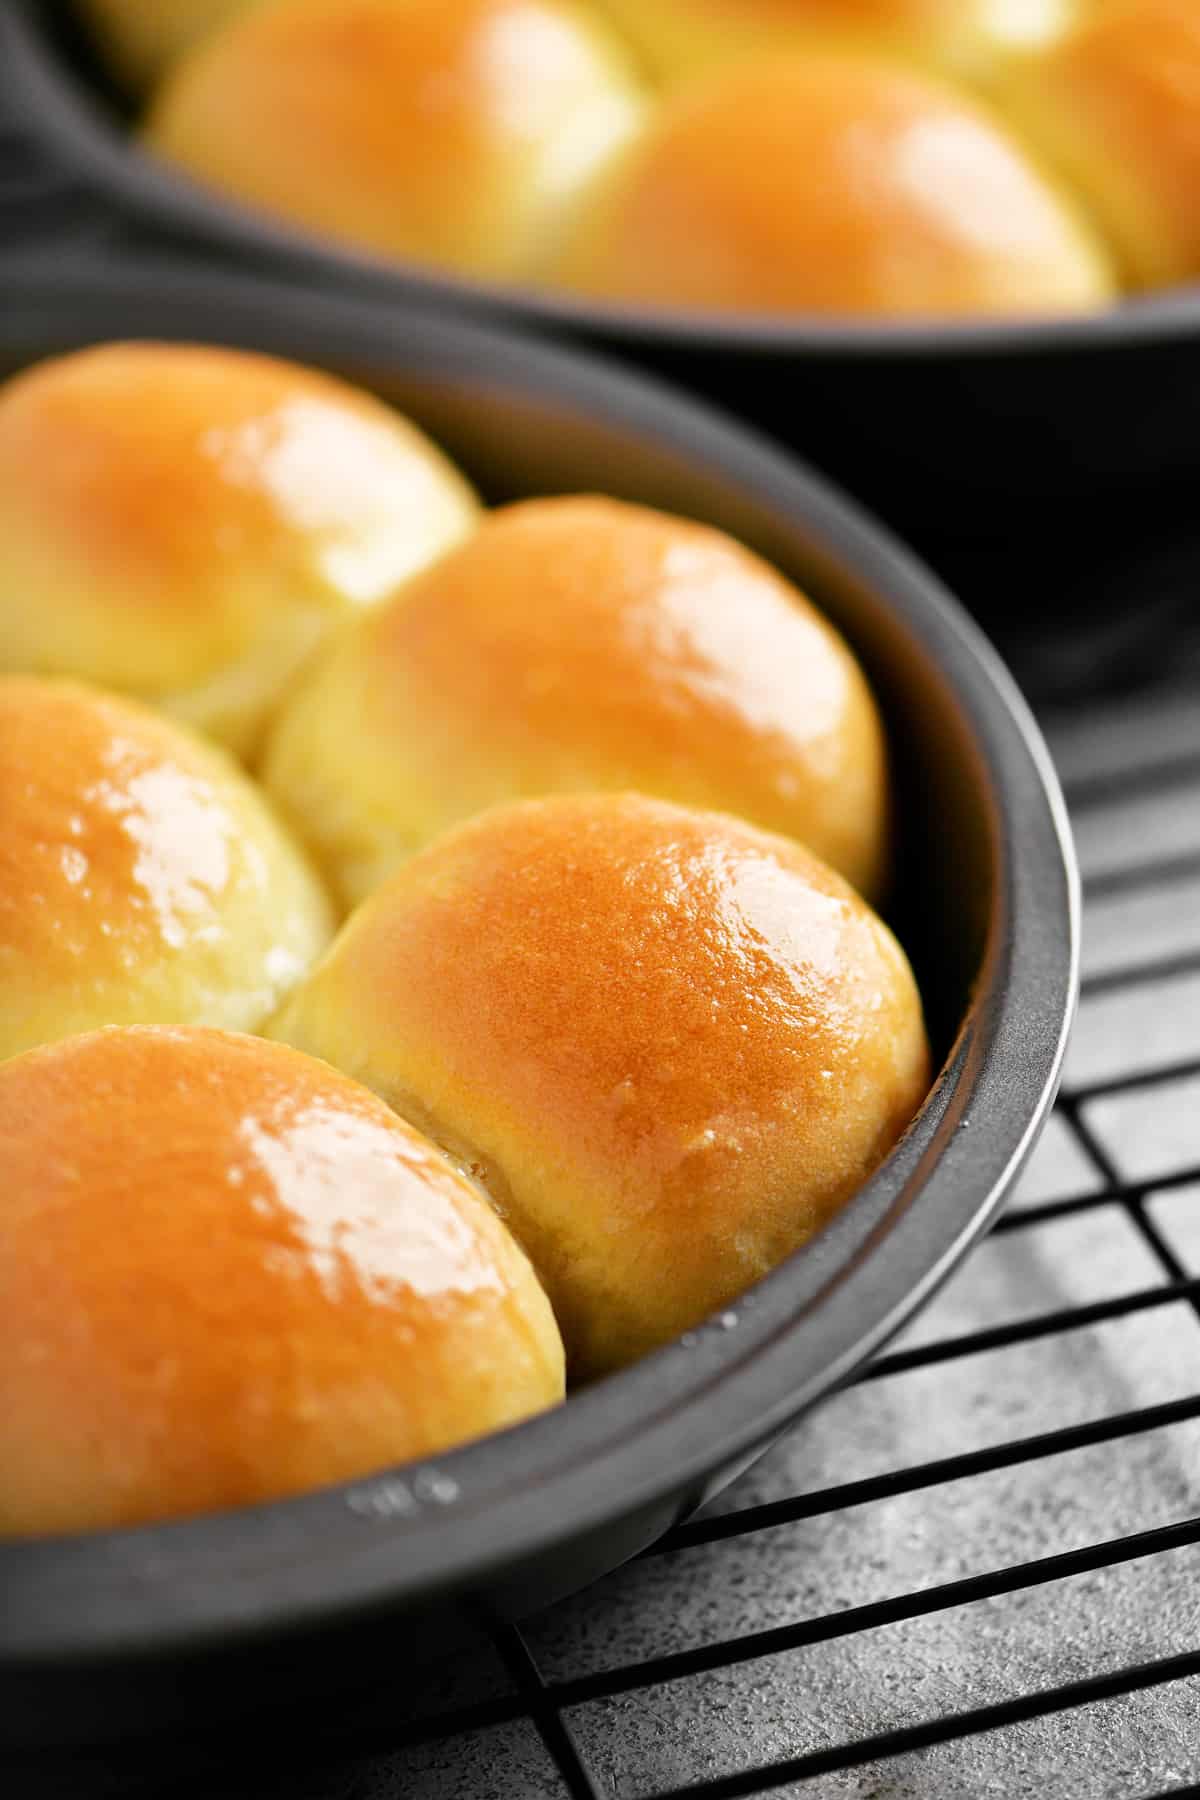 Why You Should Bake Rolls in a Cake Pan